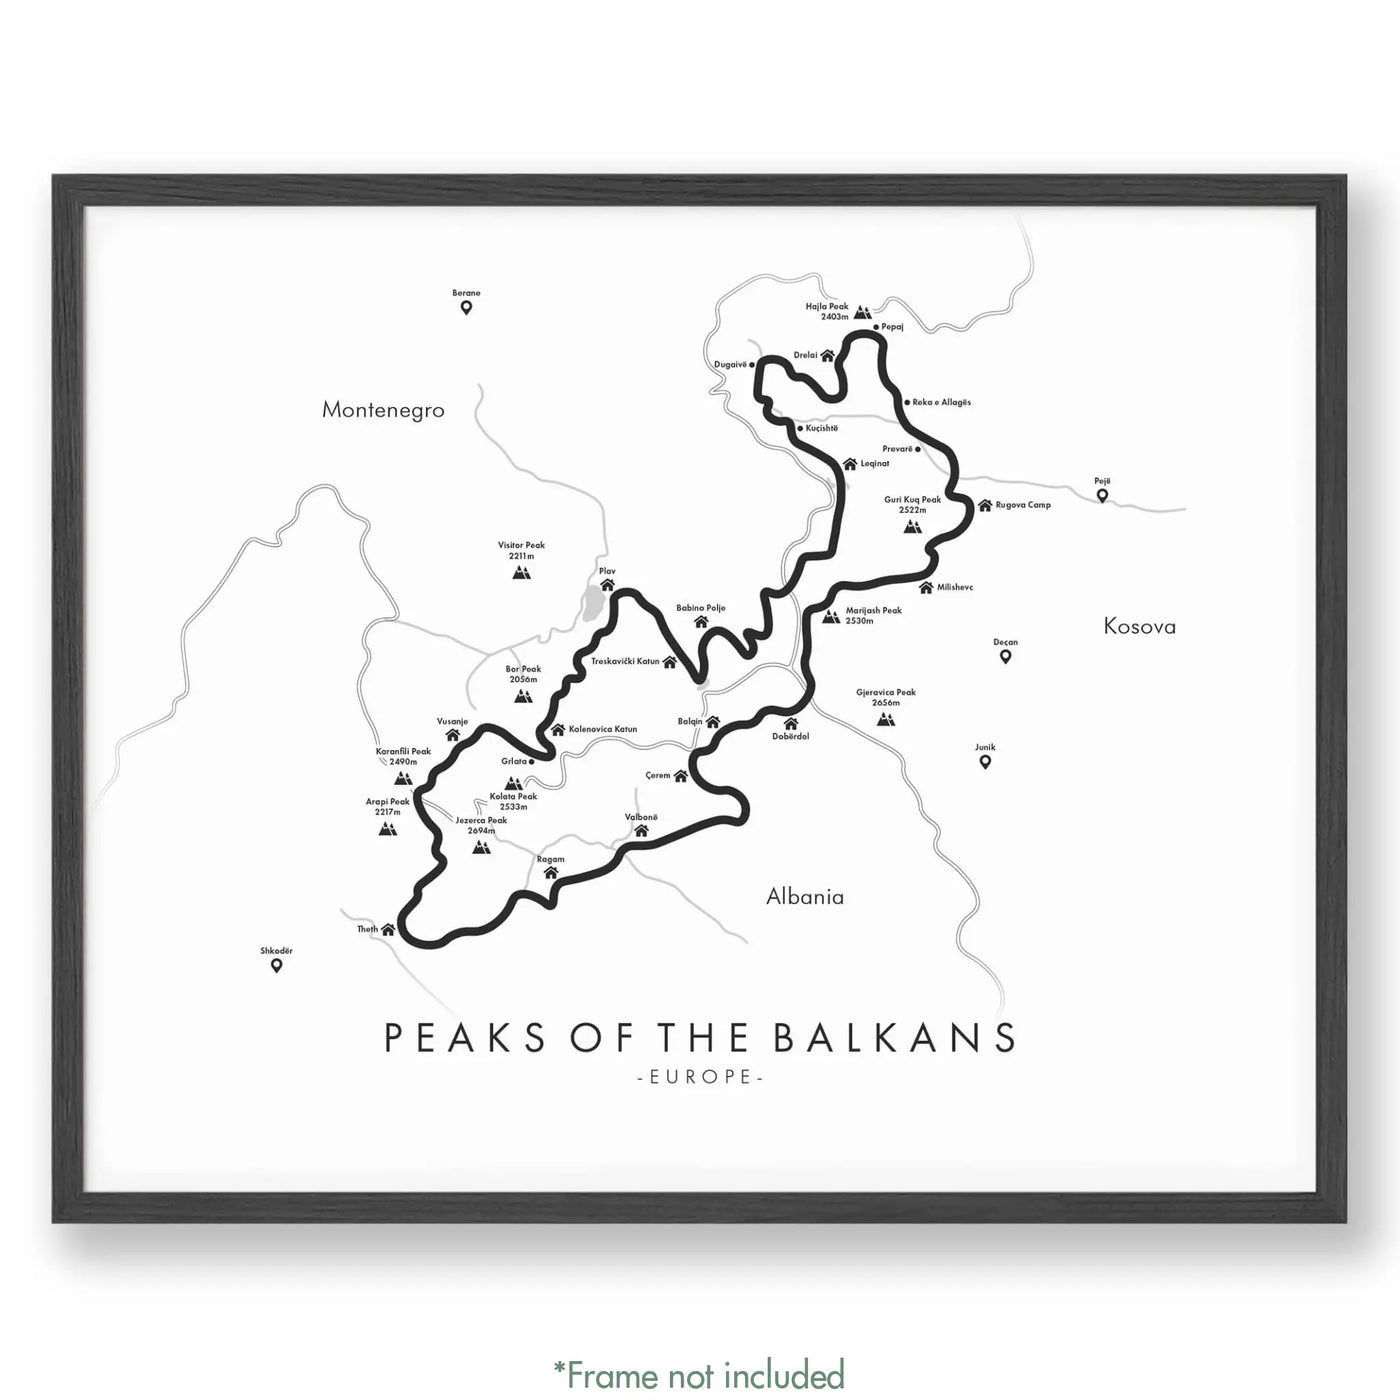 Trail Poster of Peaks of the Balkans - White